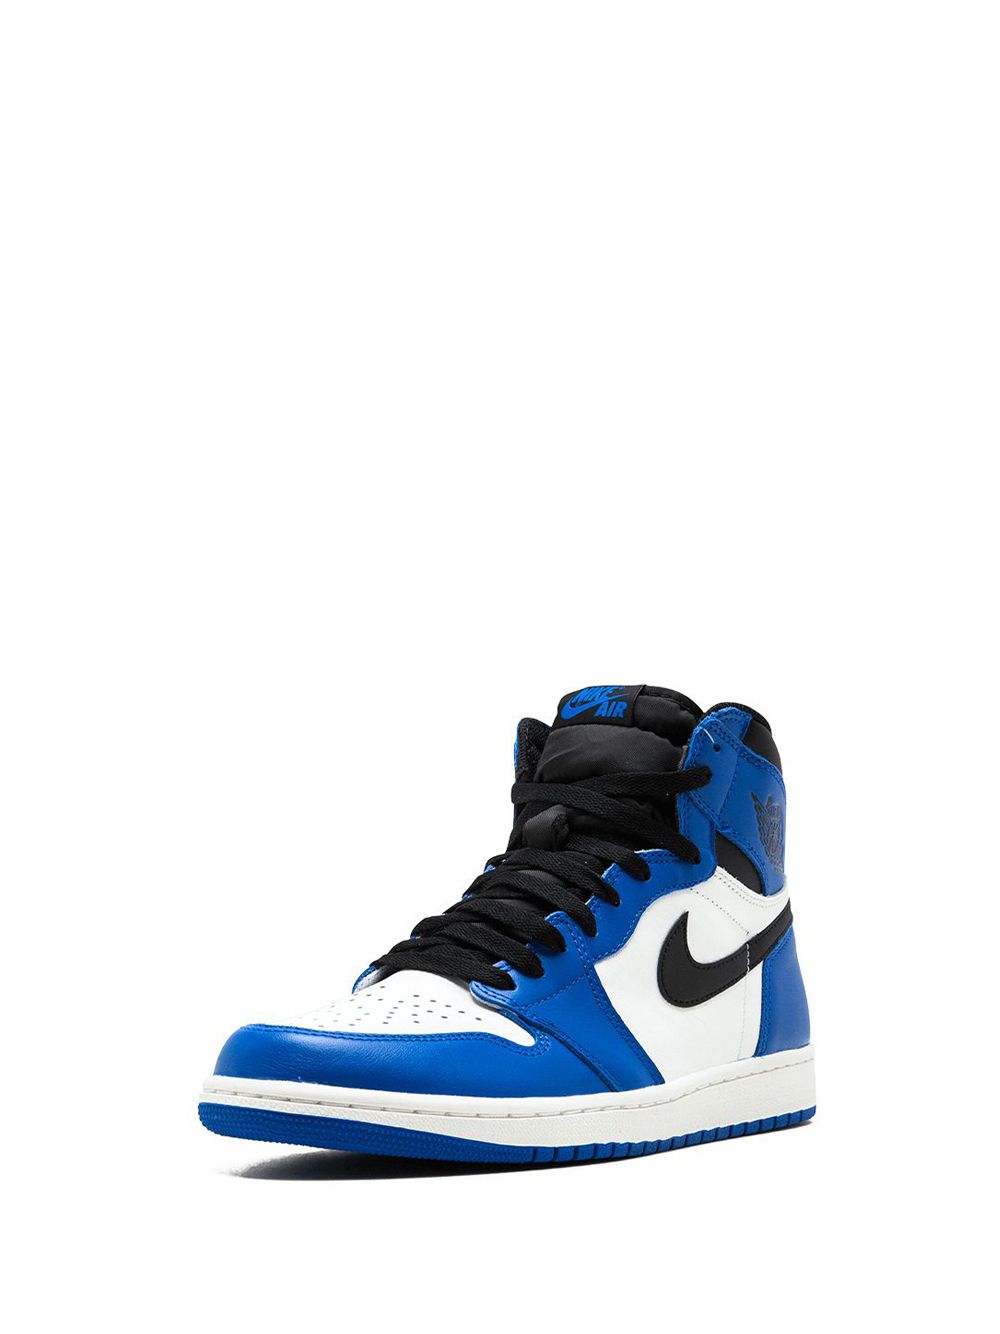 MY THOUGHTS ON THE AIR JORDAN 1 'GAME ROYAL' 